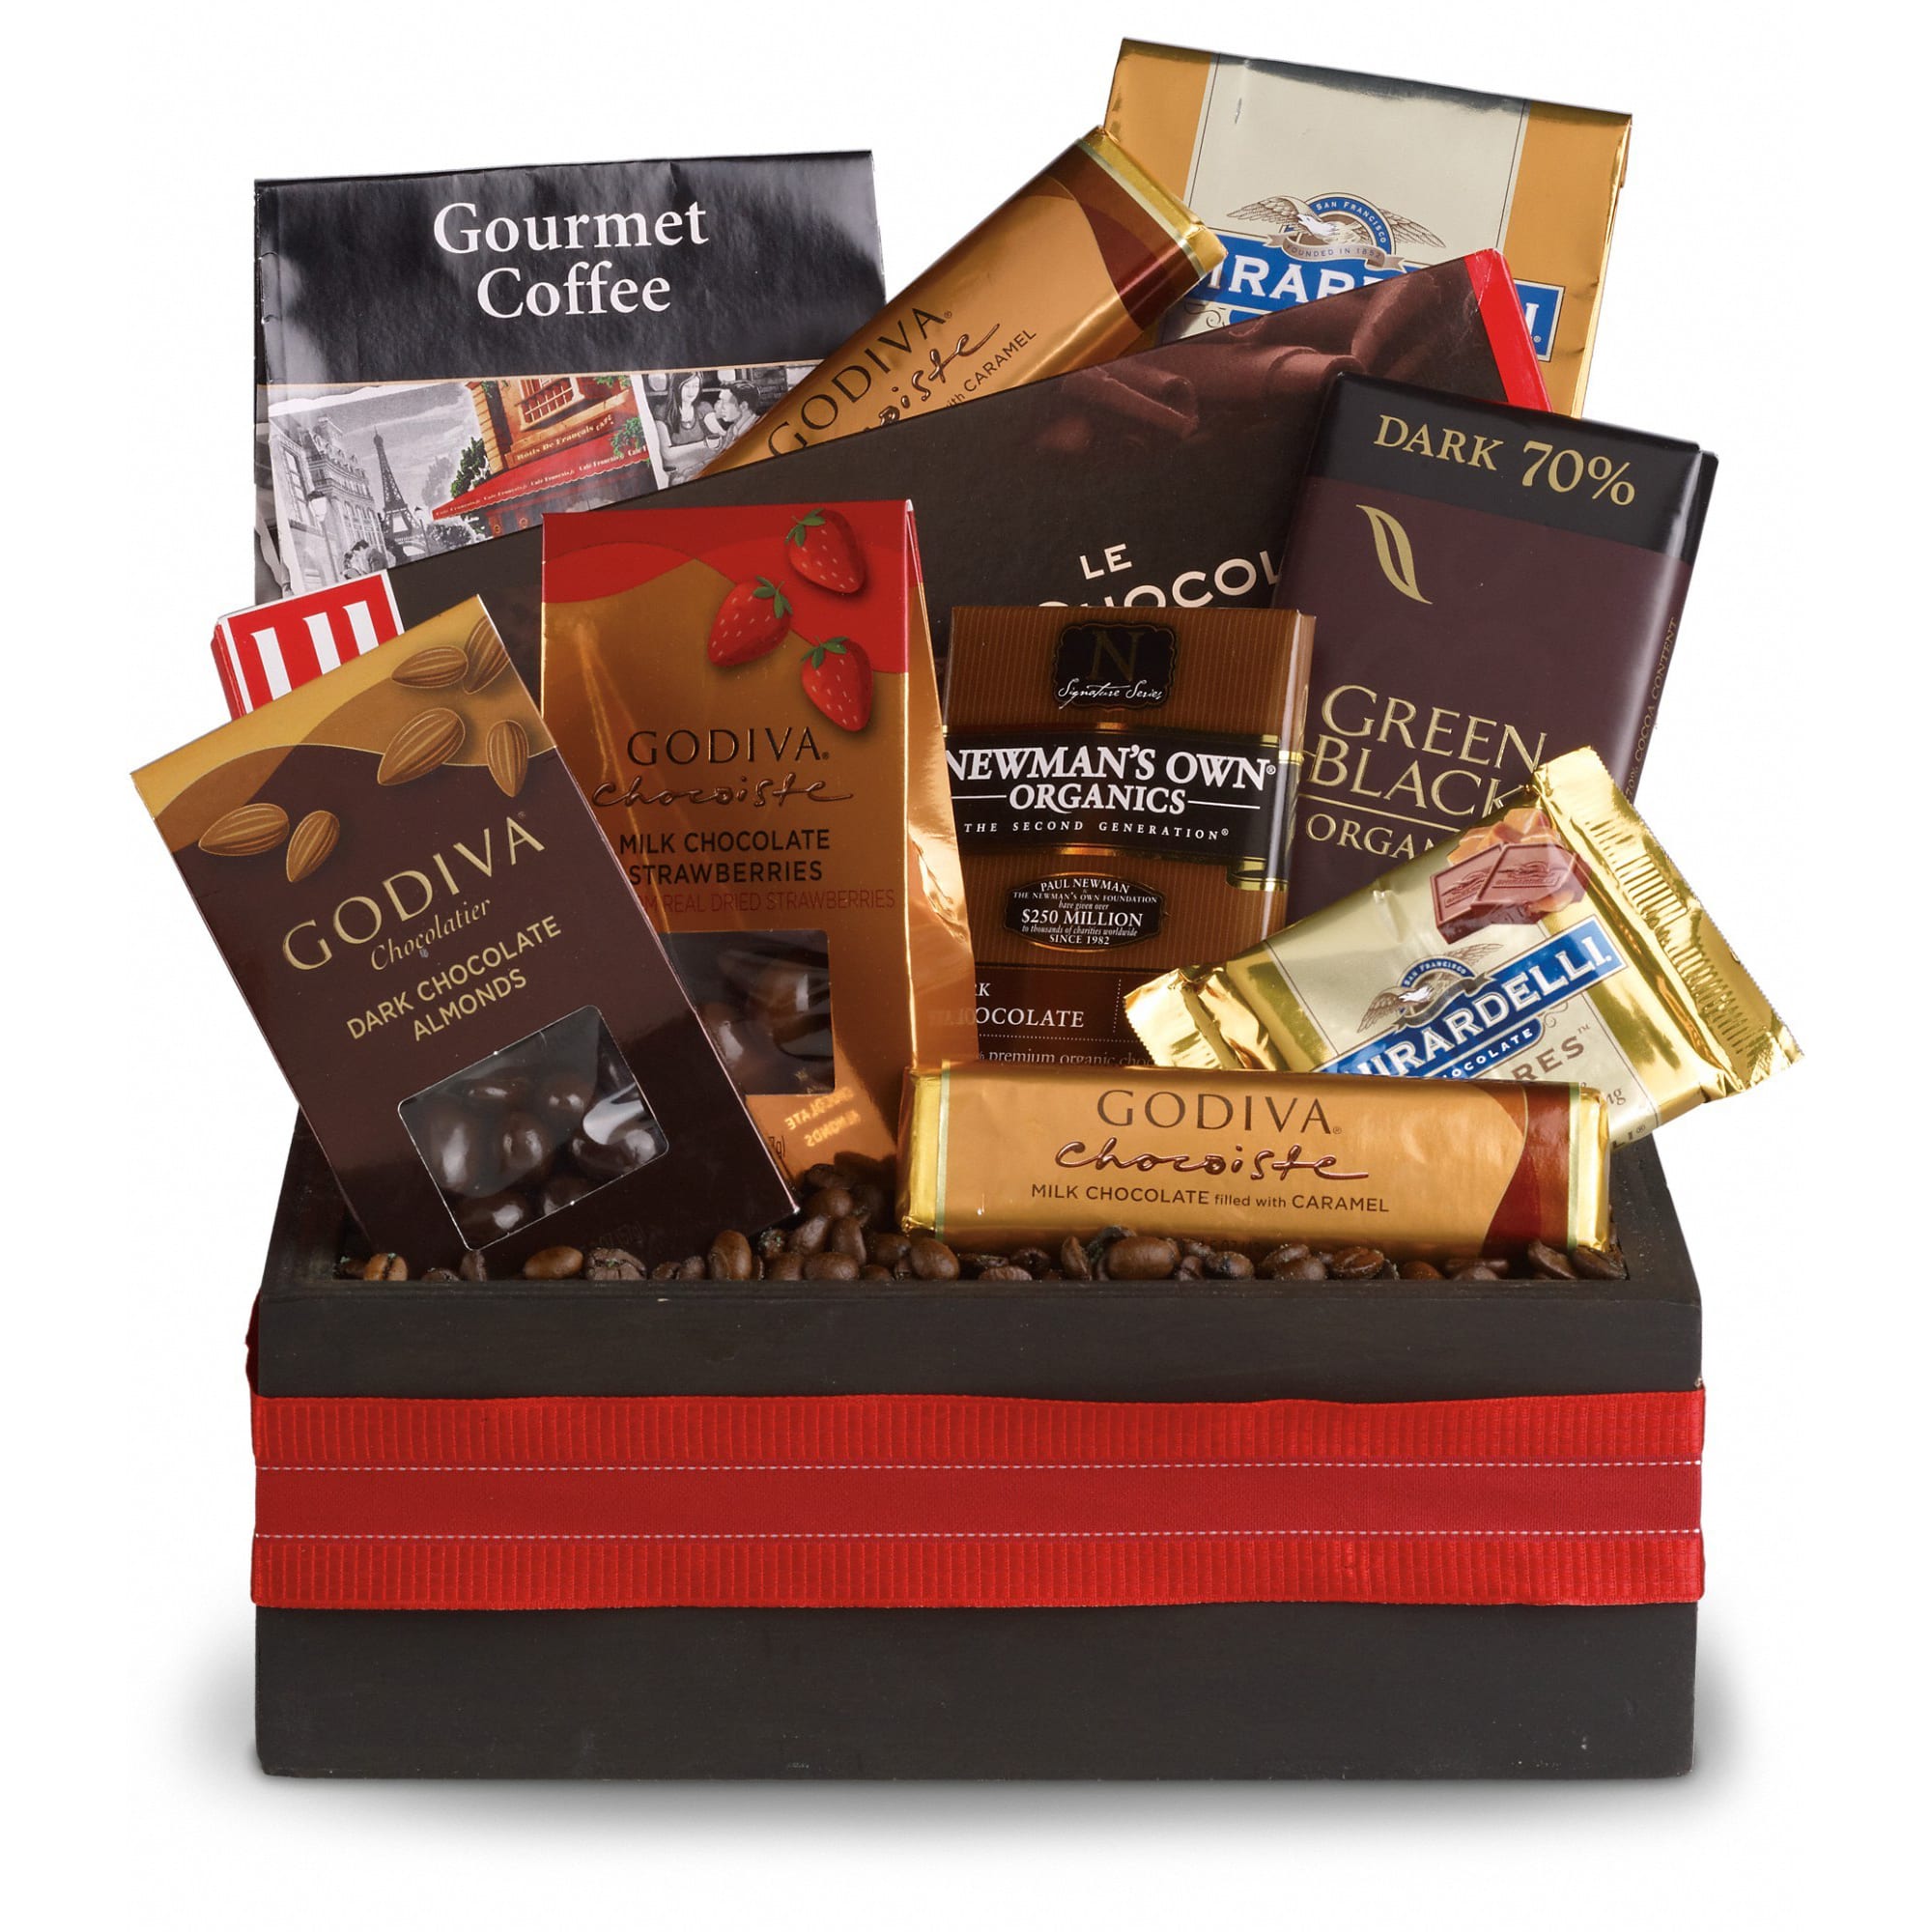 Luxurious Indulgence  - If we had to sum up this luxurious basket in one word, there's no question the word is WOW! Every kind of luxurious chocolate, including chocolate-covered strawberries and chocolate covered almonds. Of course no adult indulgence would be complete without some gourmet coffee to go along with it, so we've included that too, just for good measure!    Gourmet chocolate bars, cookies, chocolate-covered almonds and strawberries, even more chocolate bars and bags, plus gourmet coffee are deliciously placed inside a ribbon-wrapped wooden box. This gift really raises the bar on luxury indulgences!    Approximately 12&quot; W x 12 1/2&quot; H      Please note: All of our bouquets and gift baskets are hand-arranged and delivered locally by professional florists. This item may require additional lead time so same-day delivery is not available.    Orientation: N/A        As Shown : T108-3A      Deluxe : T108-3B      Premium : T108-3C    